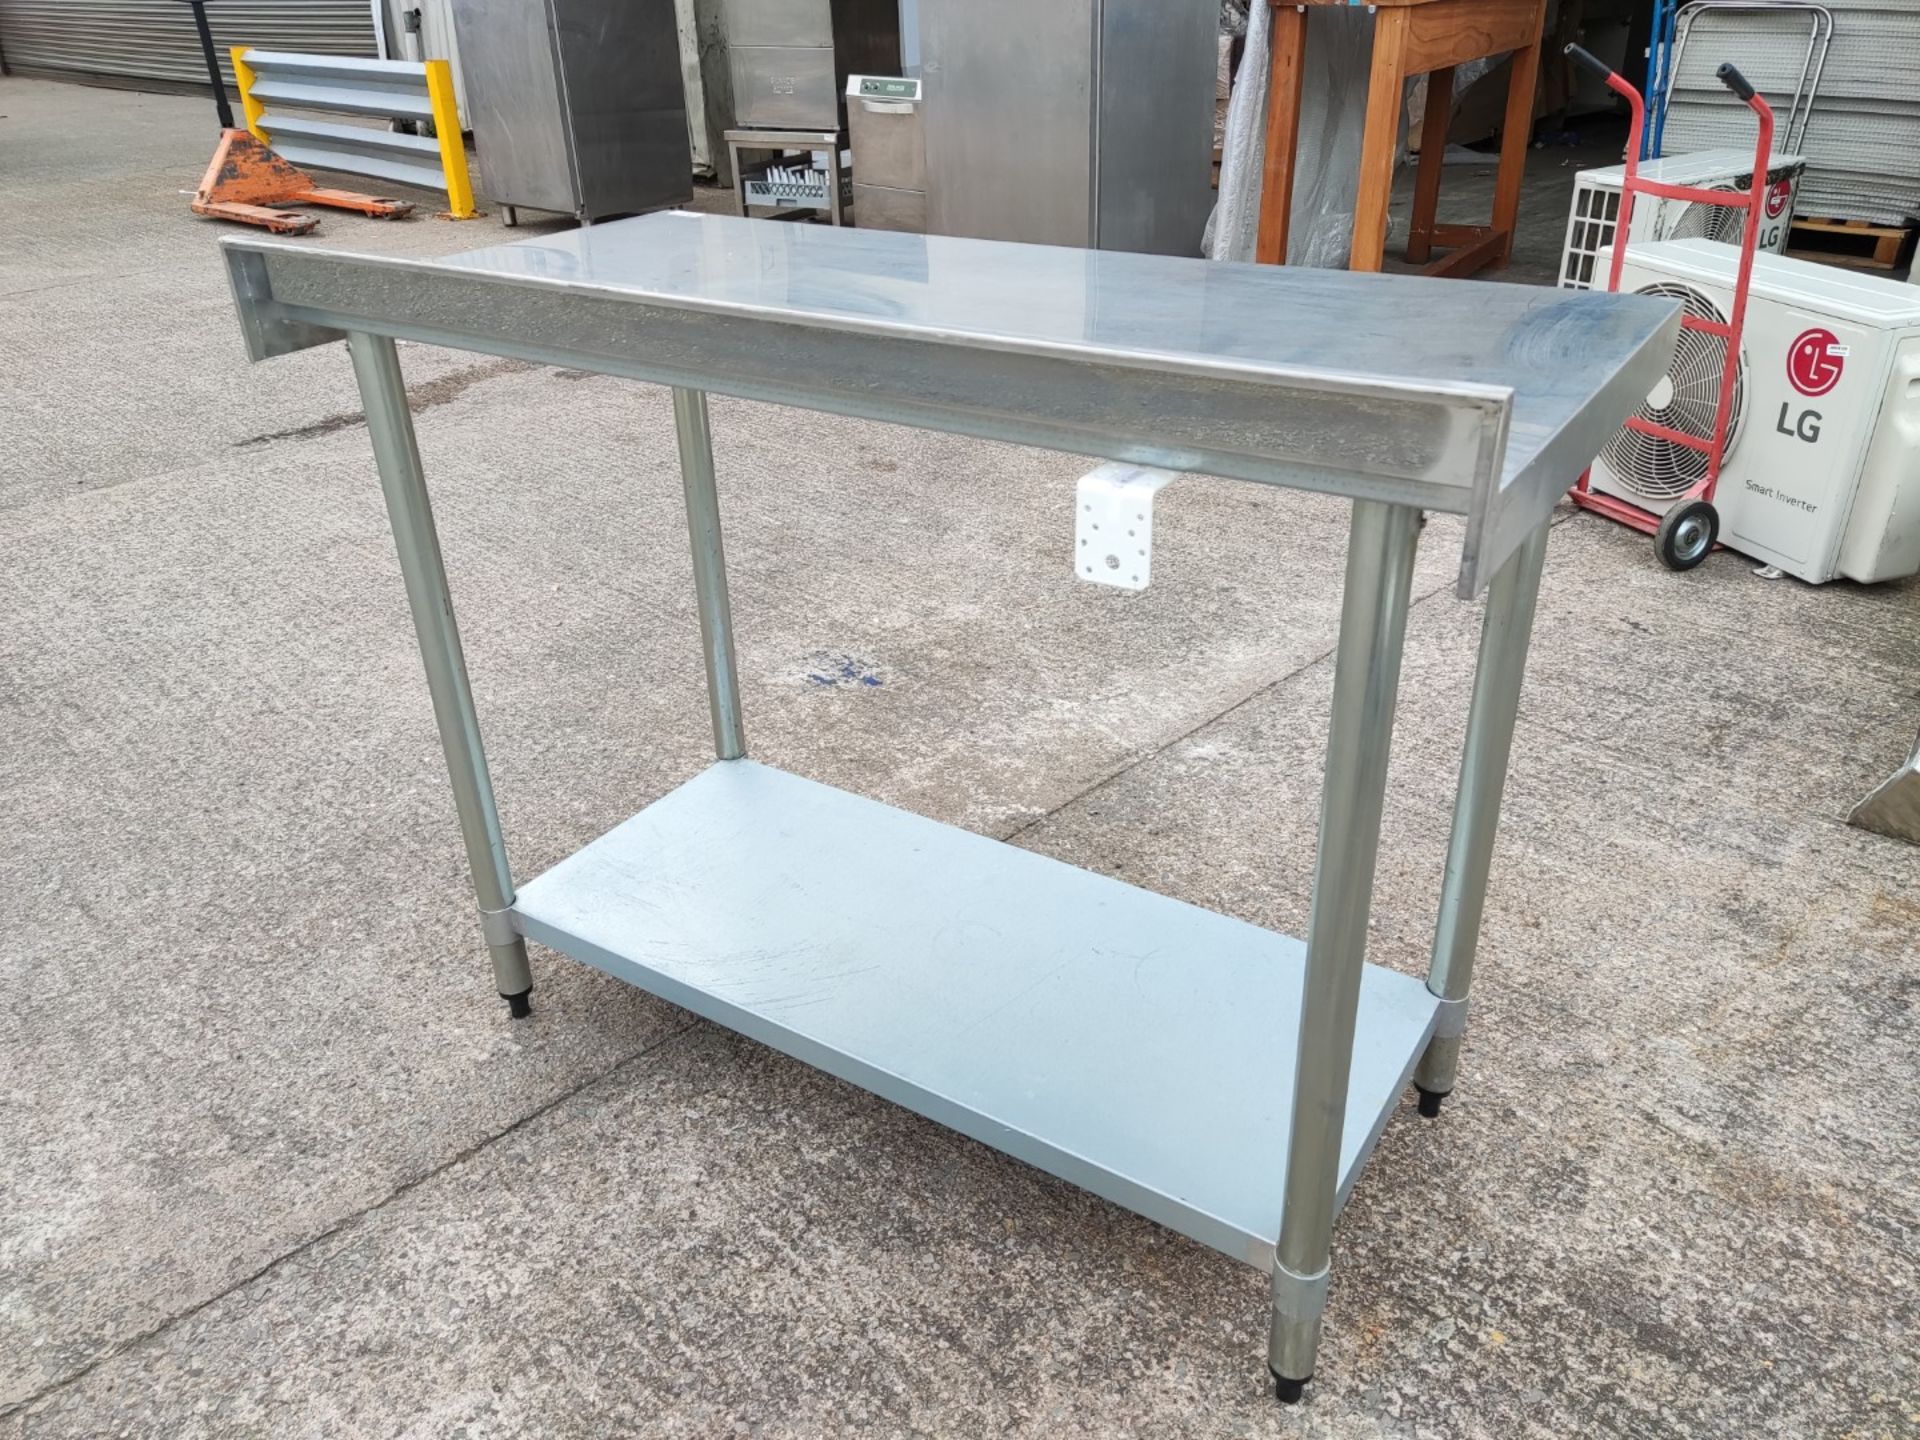 1 x Vogue Stainless Steel Prep Bench with Upstand and Shelf - 120cm (L) x 60cm (W) x 90cm (H) - - Image 5 of 7